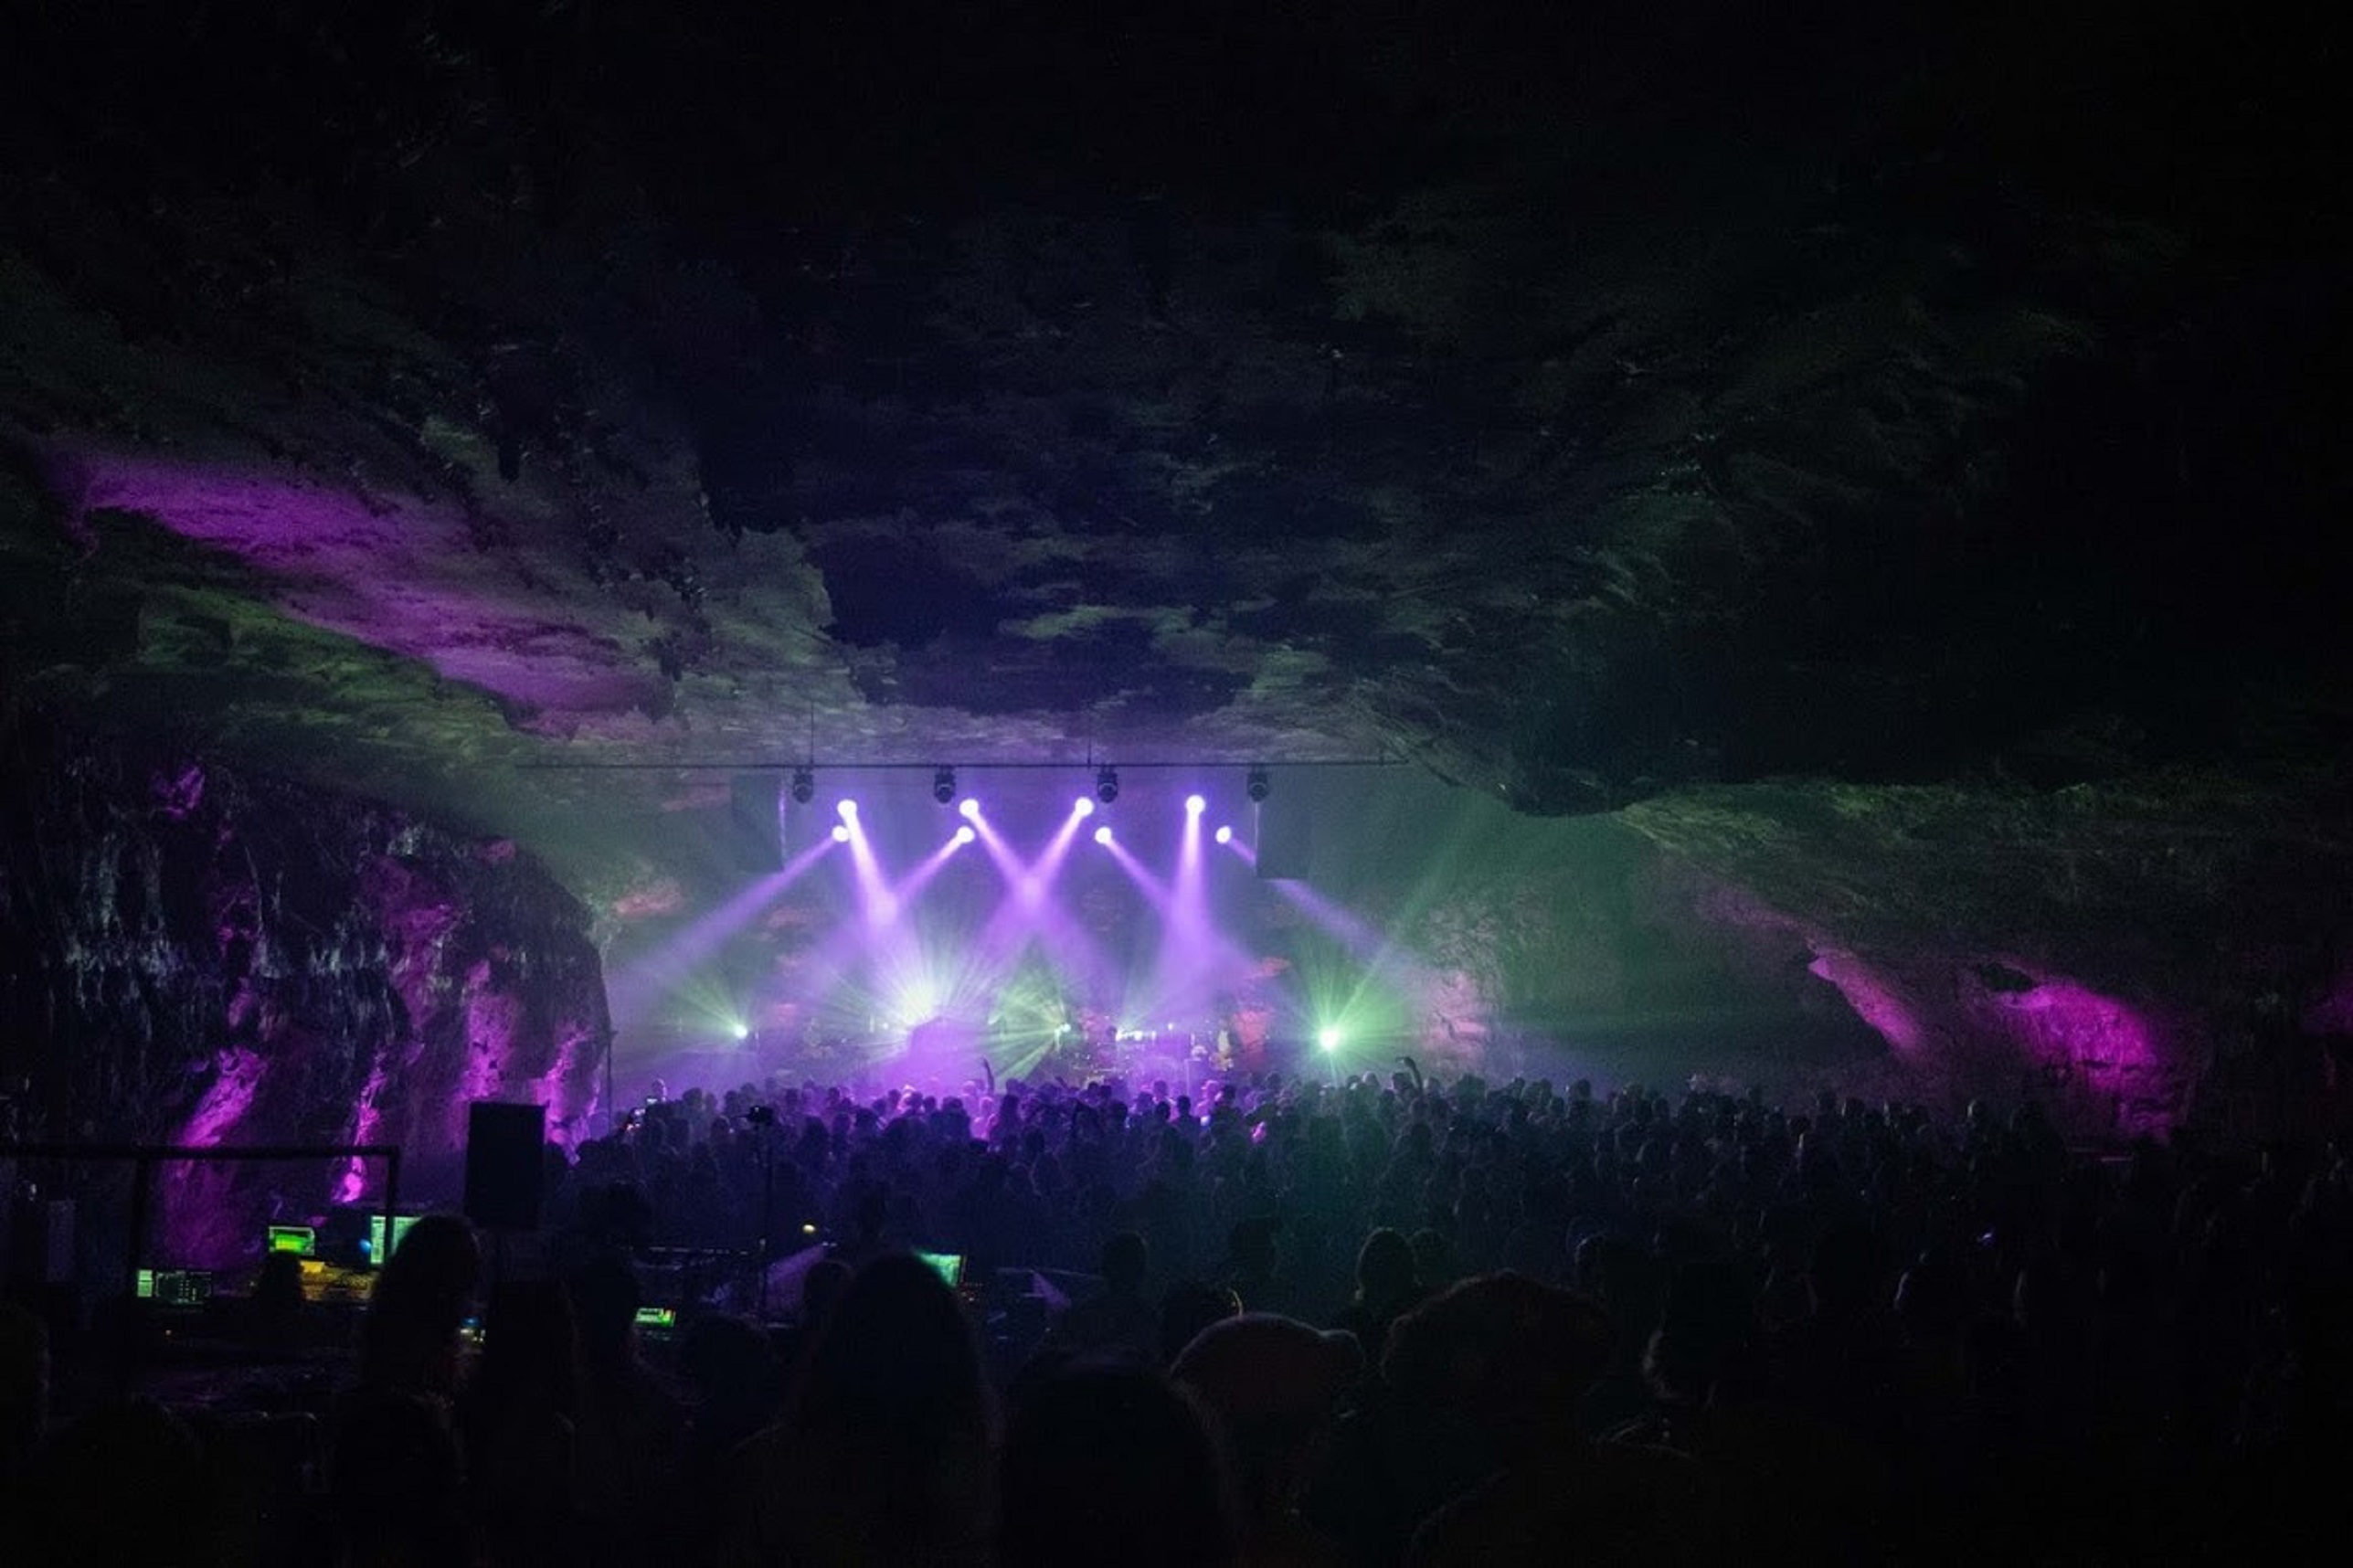 Spafford Captivates Audience with Stellar Performance at CaveJam Festival in The Caverns